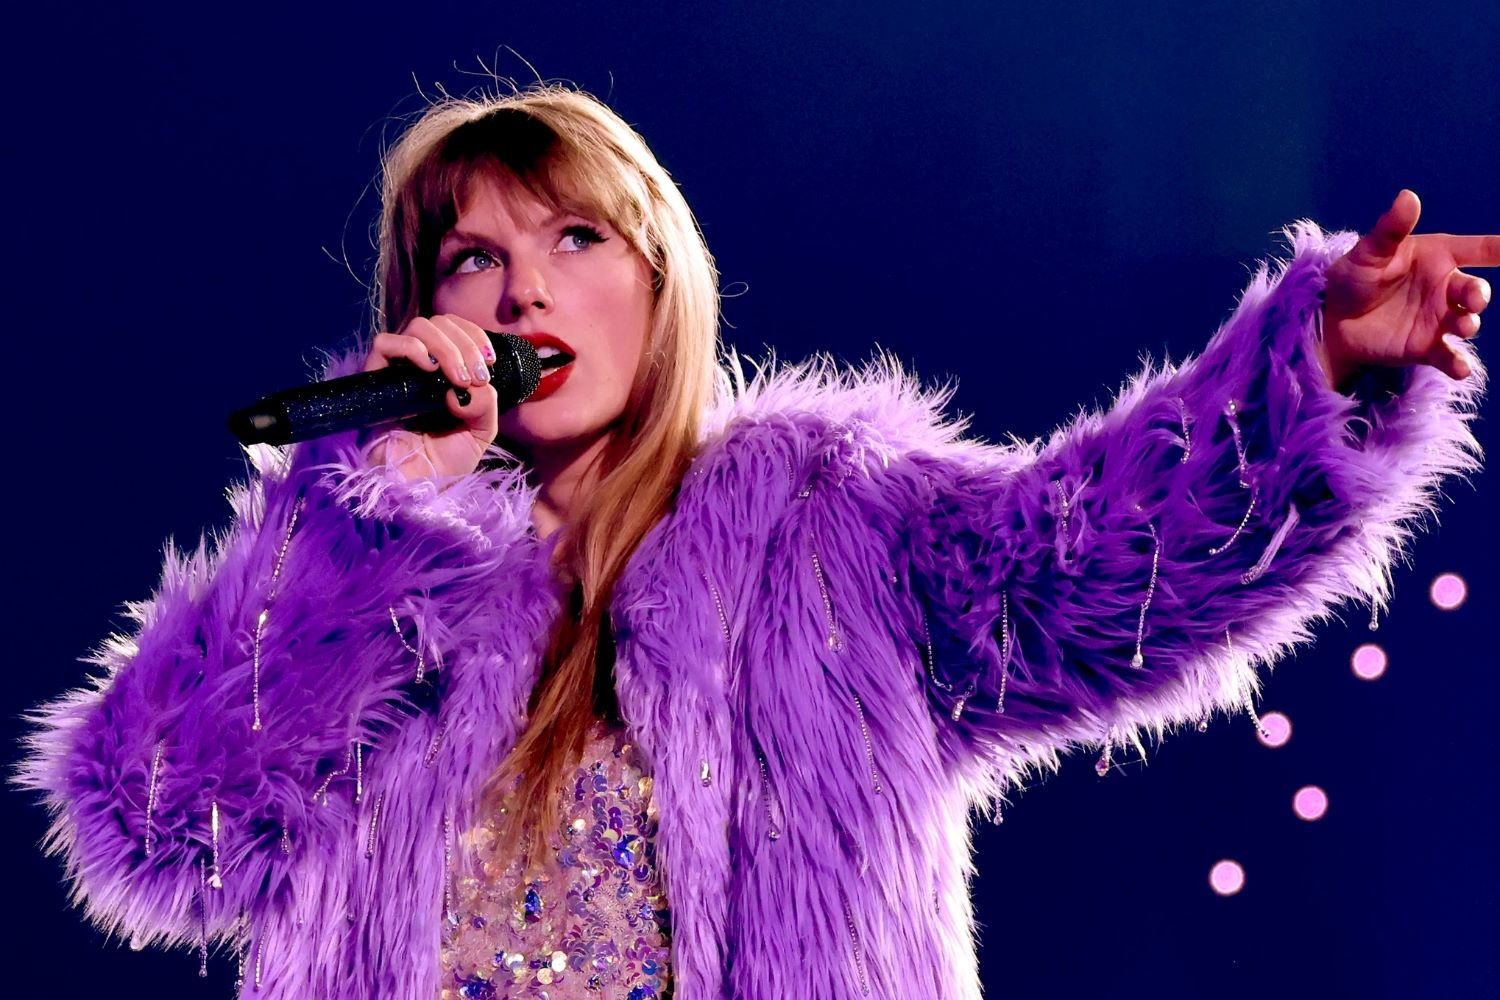 Taylor Swift's Favorite Color: Revealing The Color That Taylor Swift Loves